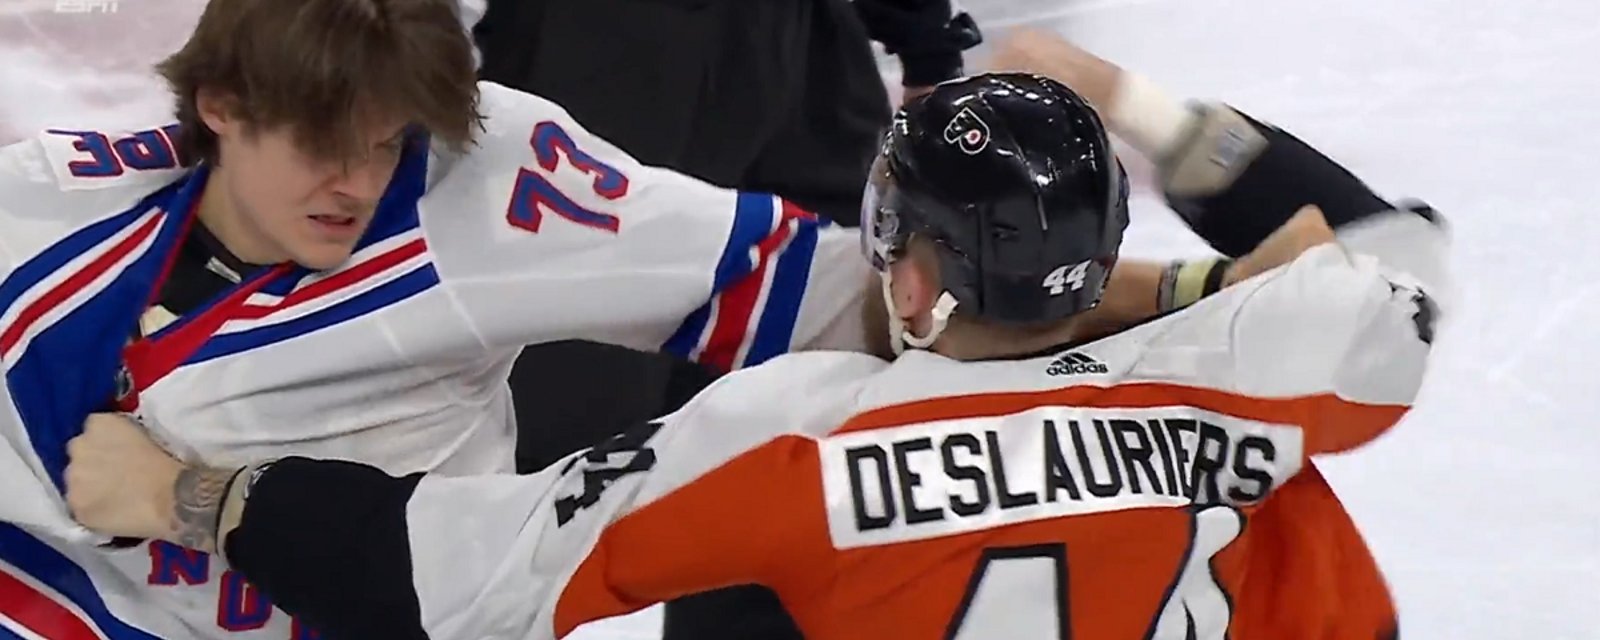 Rempe and Deslauriers leave each other battered and bruised.